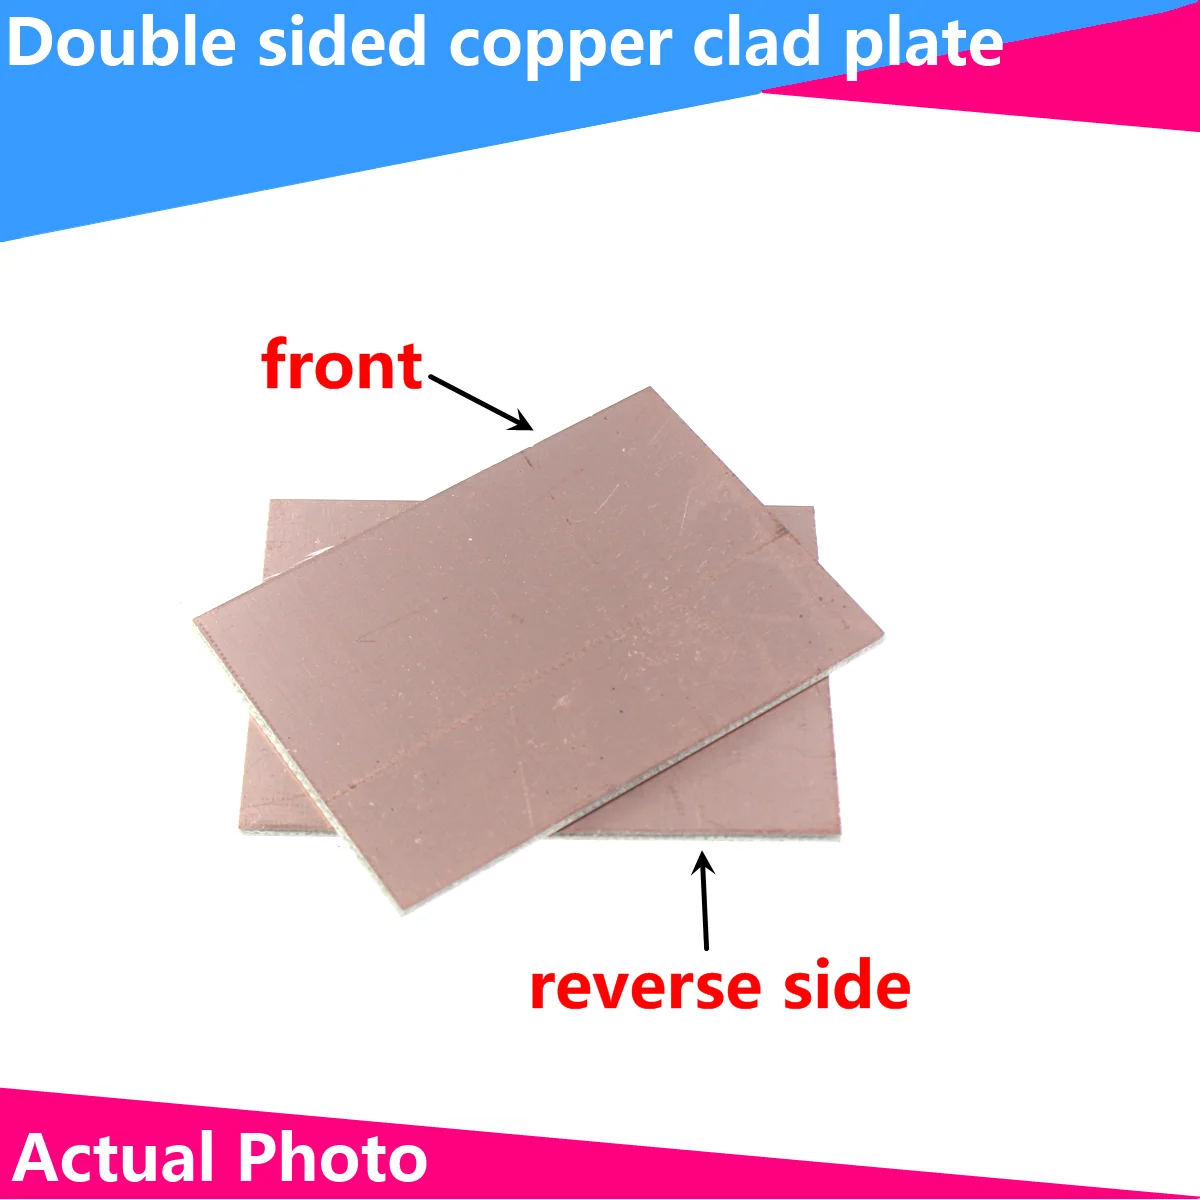 5PCS 5x7 7x9 10x15 12x18 15x20 cm FR4 Copper Clad Laminate Sheet Circuit Double Sided PCB natural cotton aromatherapy pouch drastring natural cosmetic packing bag rice bag 7x9 9x12 10x15 13x18 15x20 can customized logo